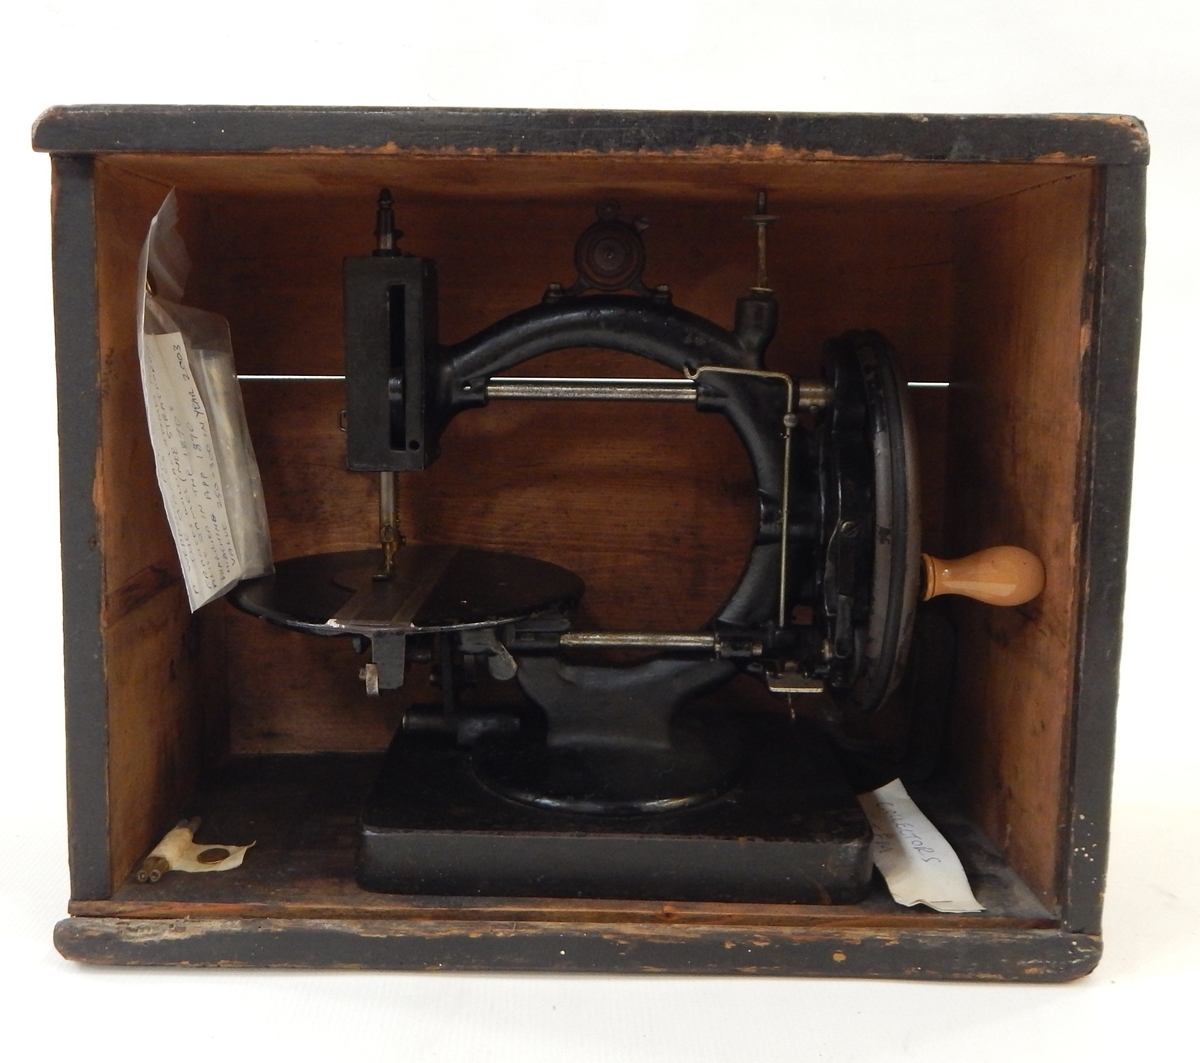 Late 19th century C-framed sewing machine, undecorated, with turned wood handle,